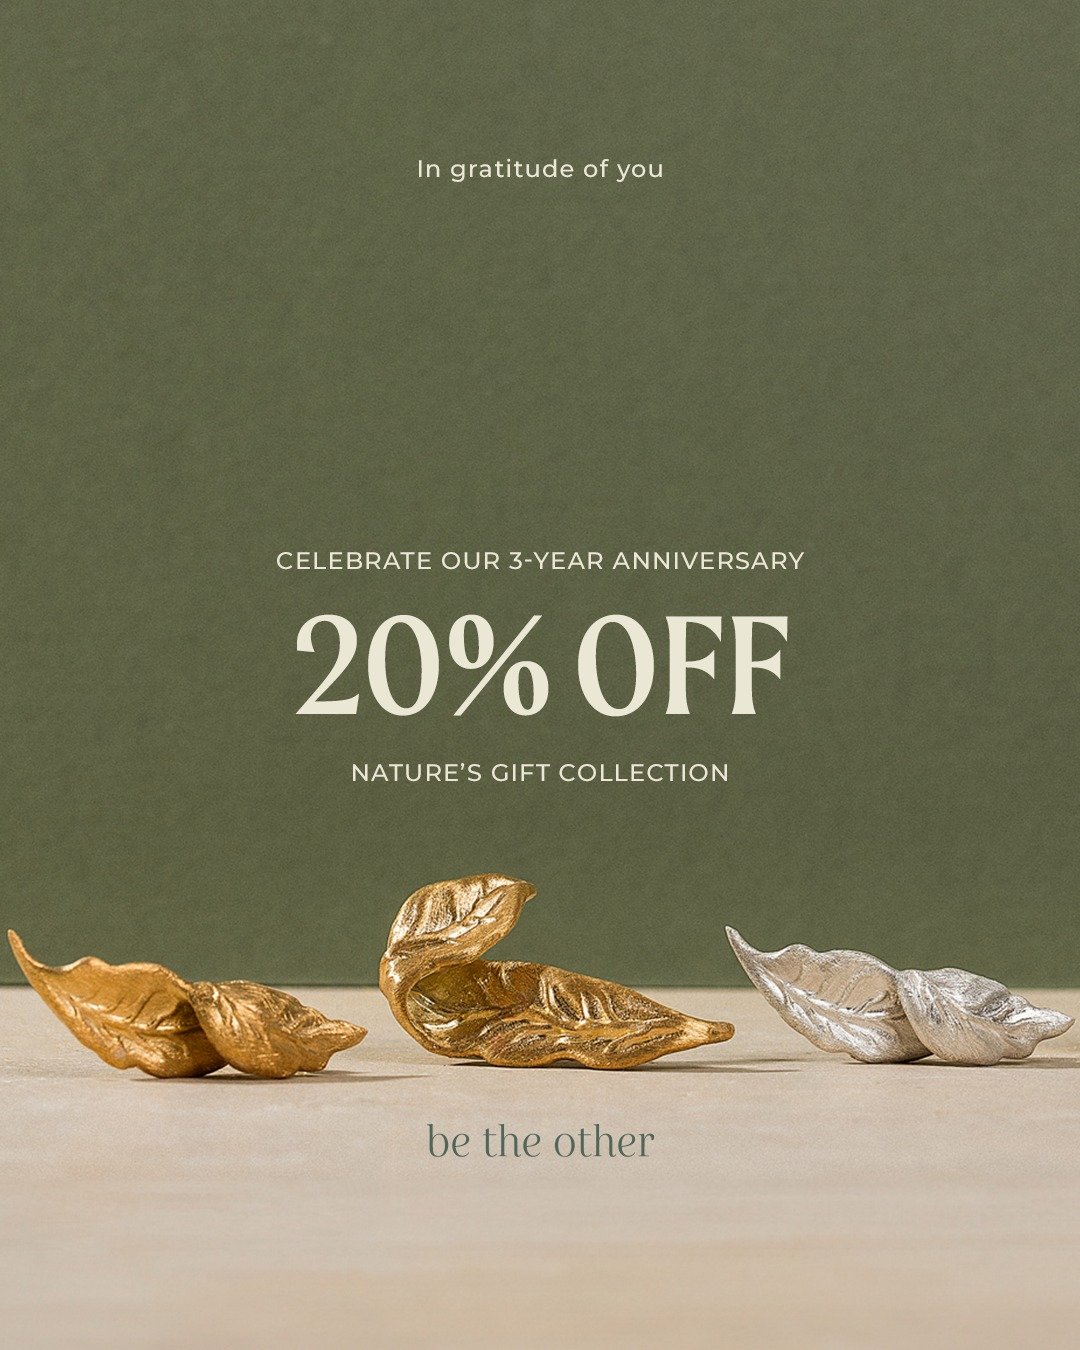 🎉✨ Celebrating 3 Years with Be The Other! 🌟

To thank you for your amazing support, enjoy 20% off our latest collection, Nature's Gift! ✨

Use code: GRATEFUL at checkout. Hurry, offer is valid for 3 days only! 💃💎

Plus, our subscribers get an ext